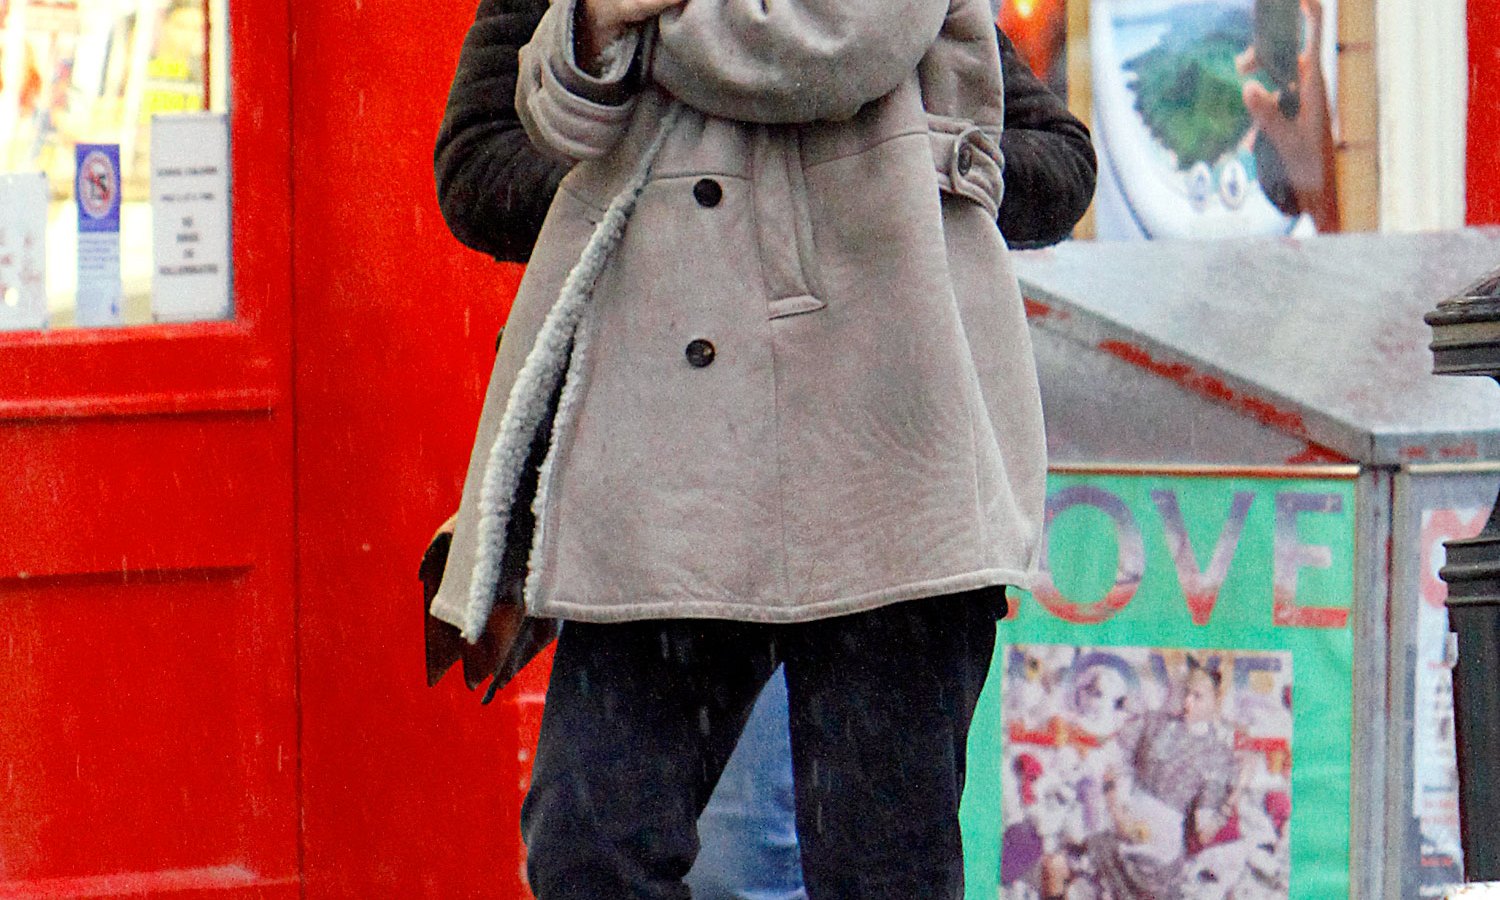 Keira Knightley is spotted out and about in North London on January 29